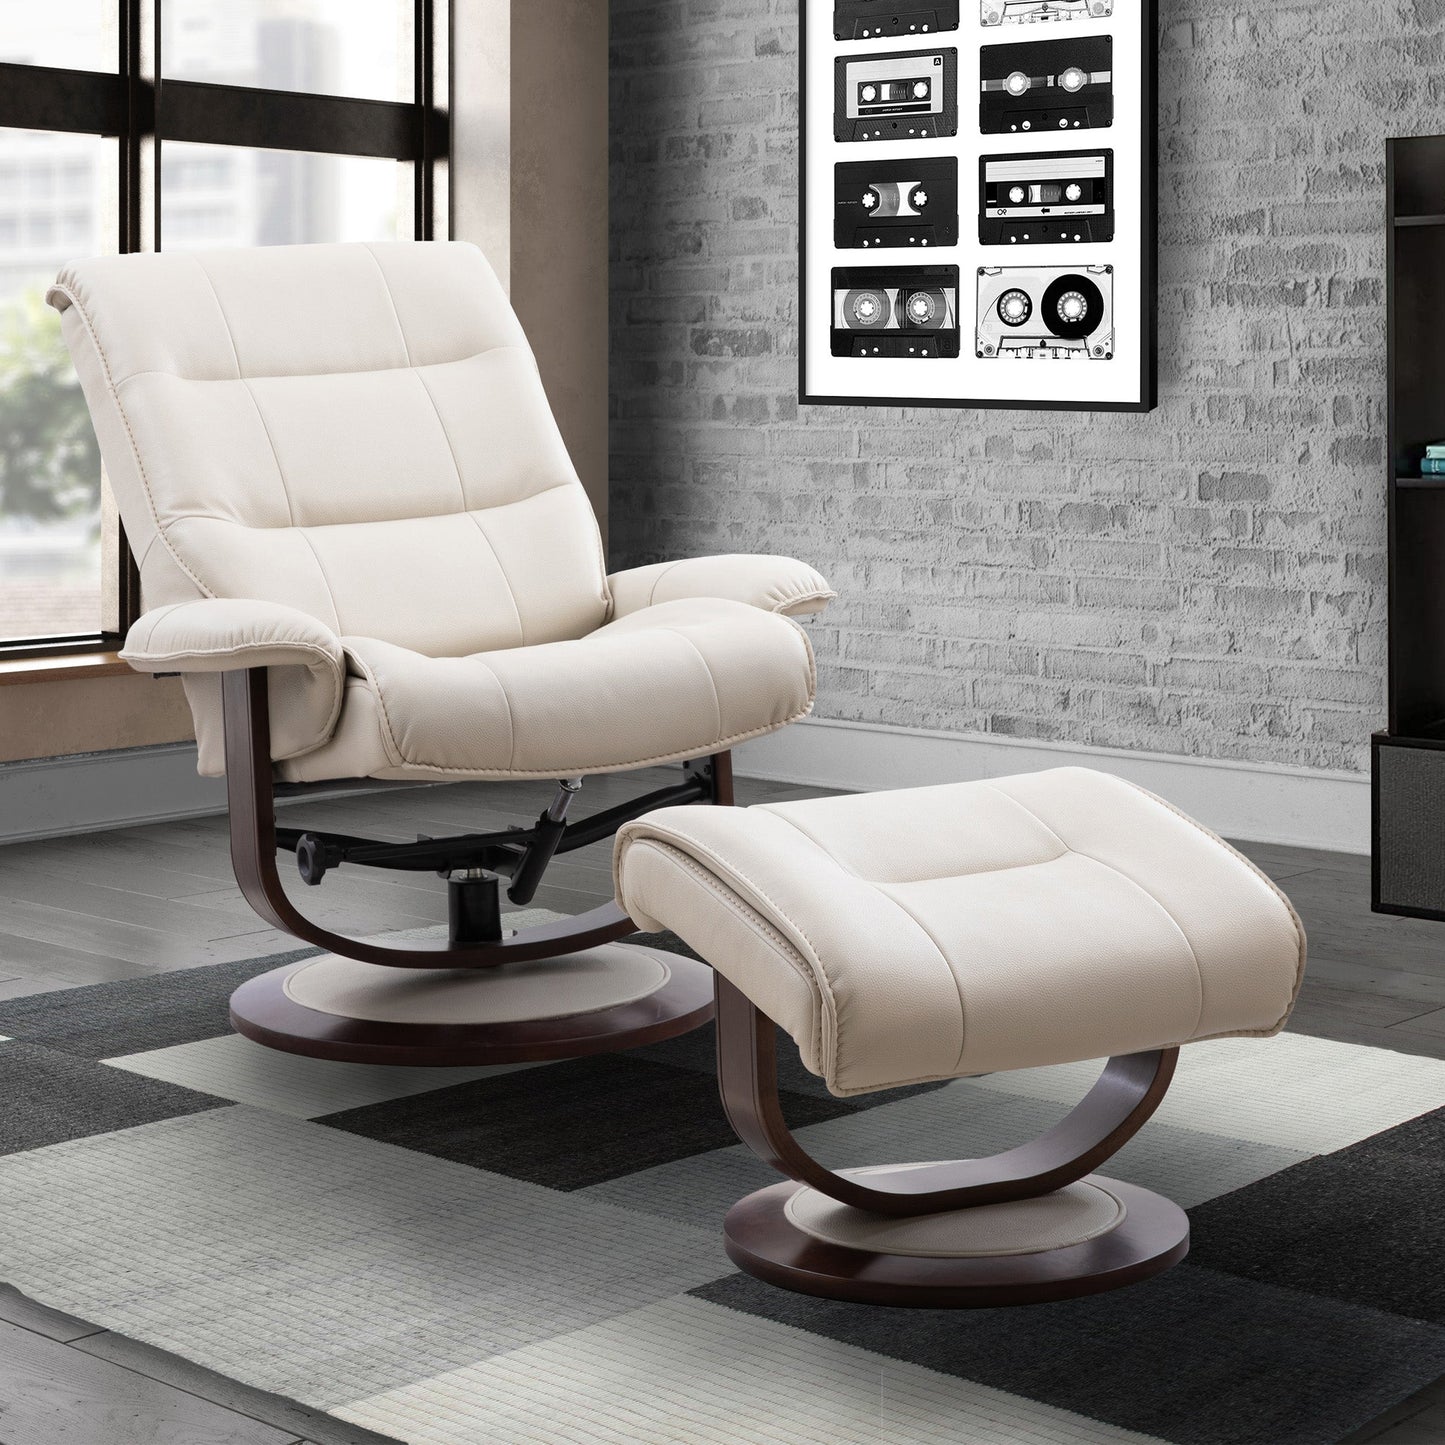 KNIGHT - OYSTER MANUAL RECLINING SWIVEL CHAIR AND OTTOMAN